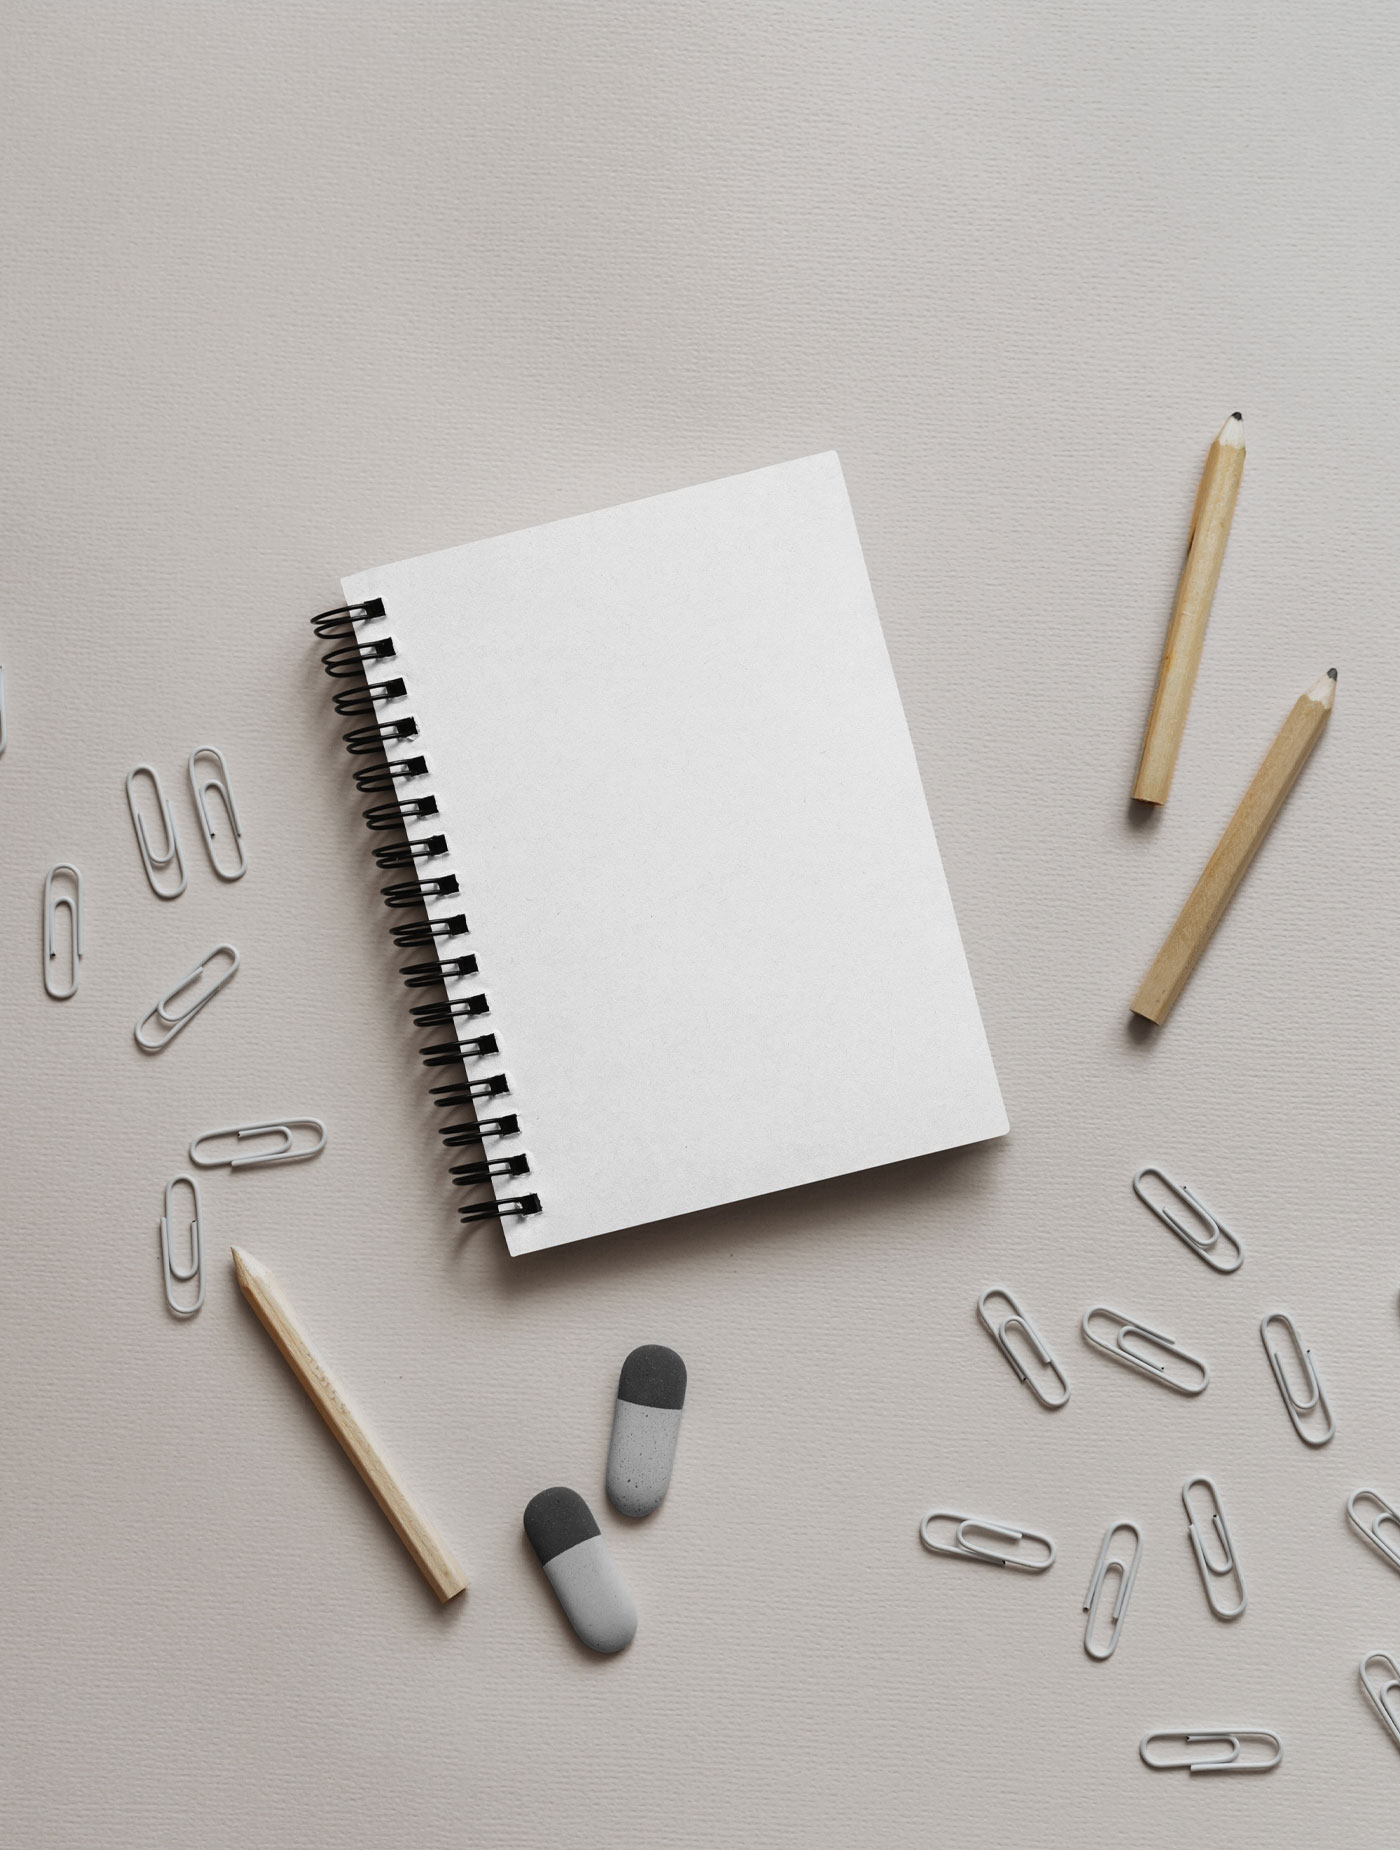 Top View of a Minimal Stationery Paper Notebook Mockup FREE PSD